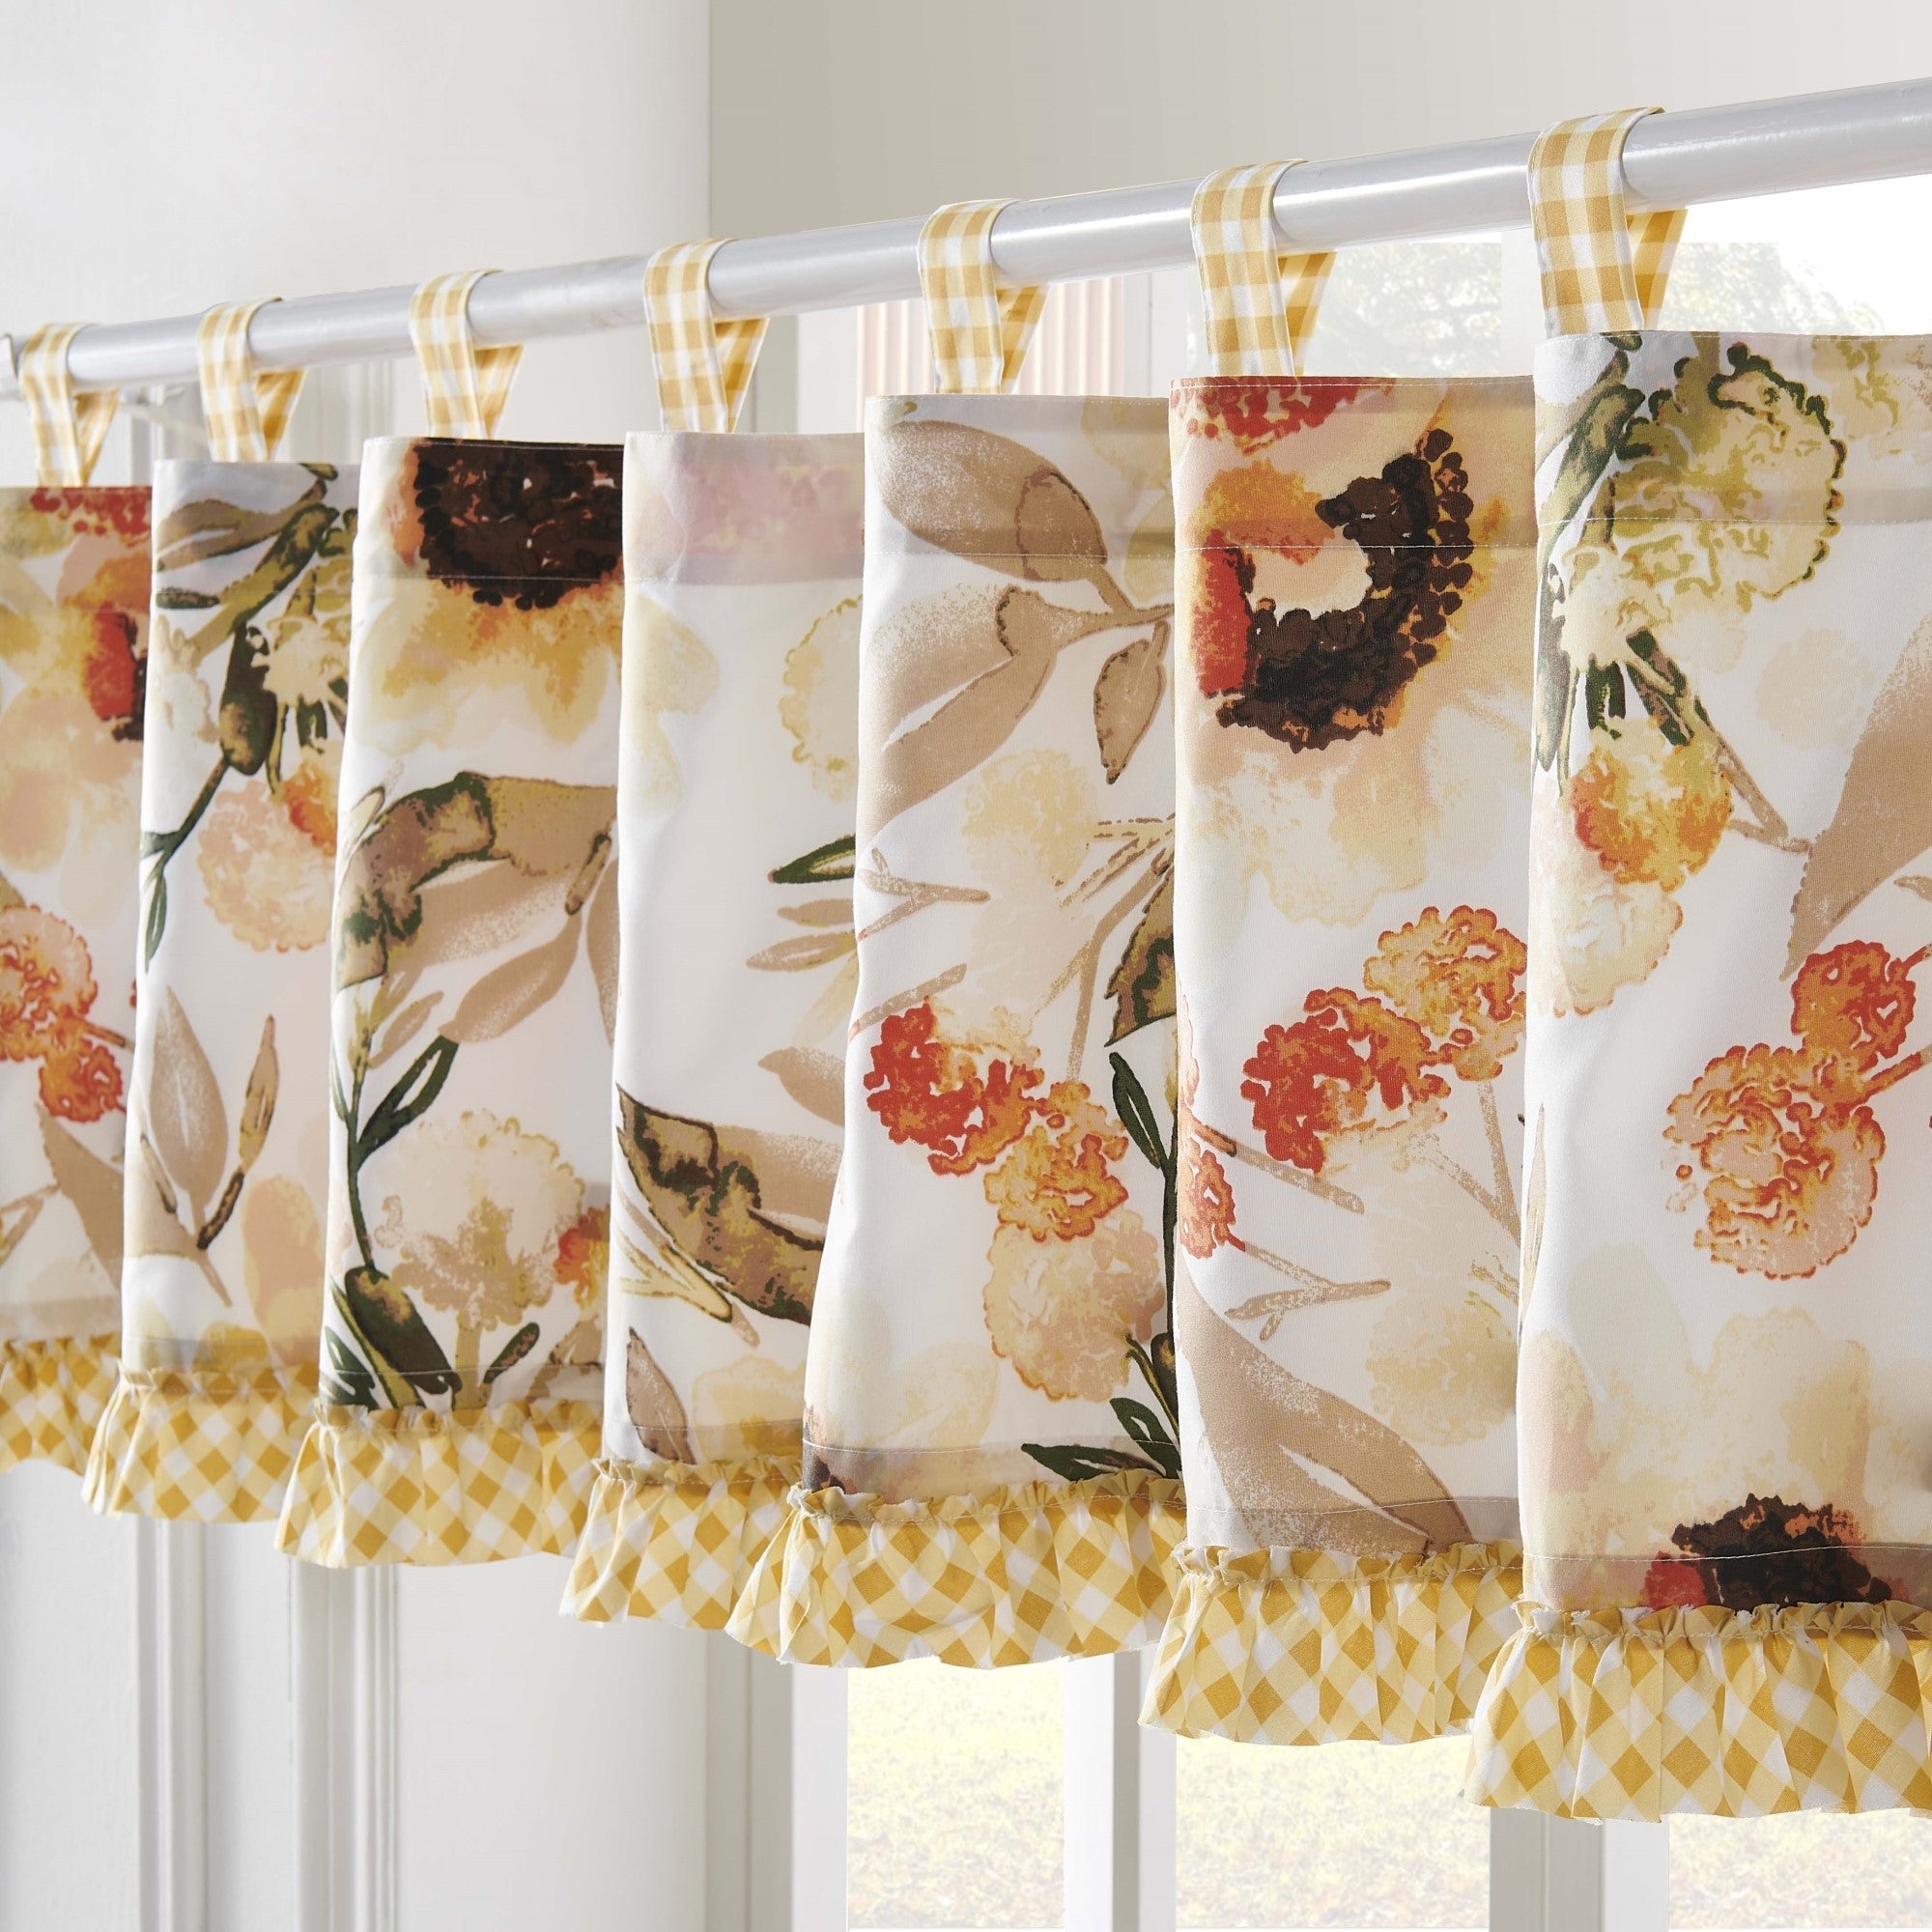 Somerset Ruffle Trimmed Window Valance 84" x 19" Gold by Greenland Home Fashion